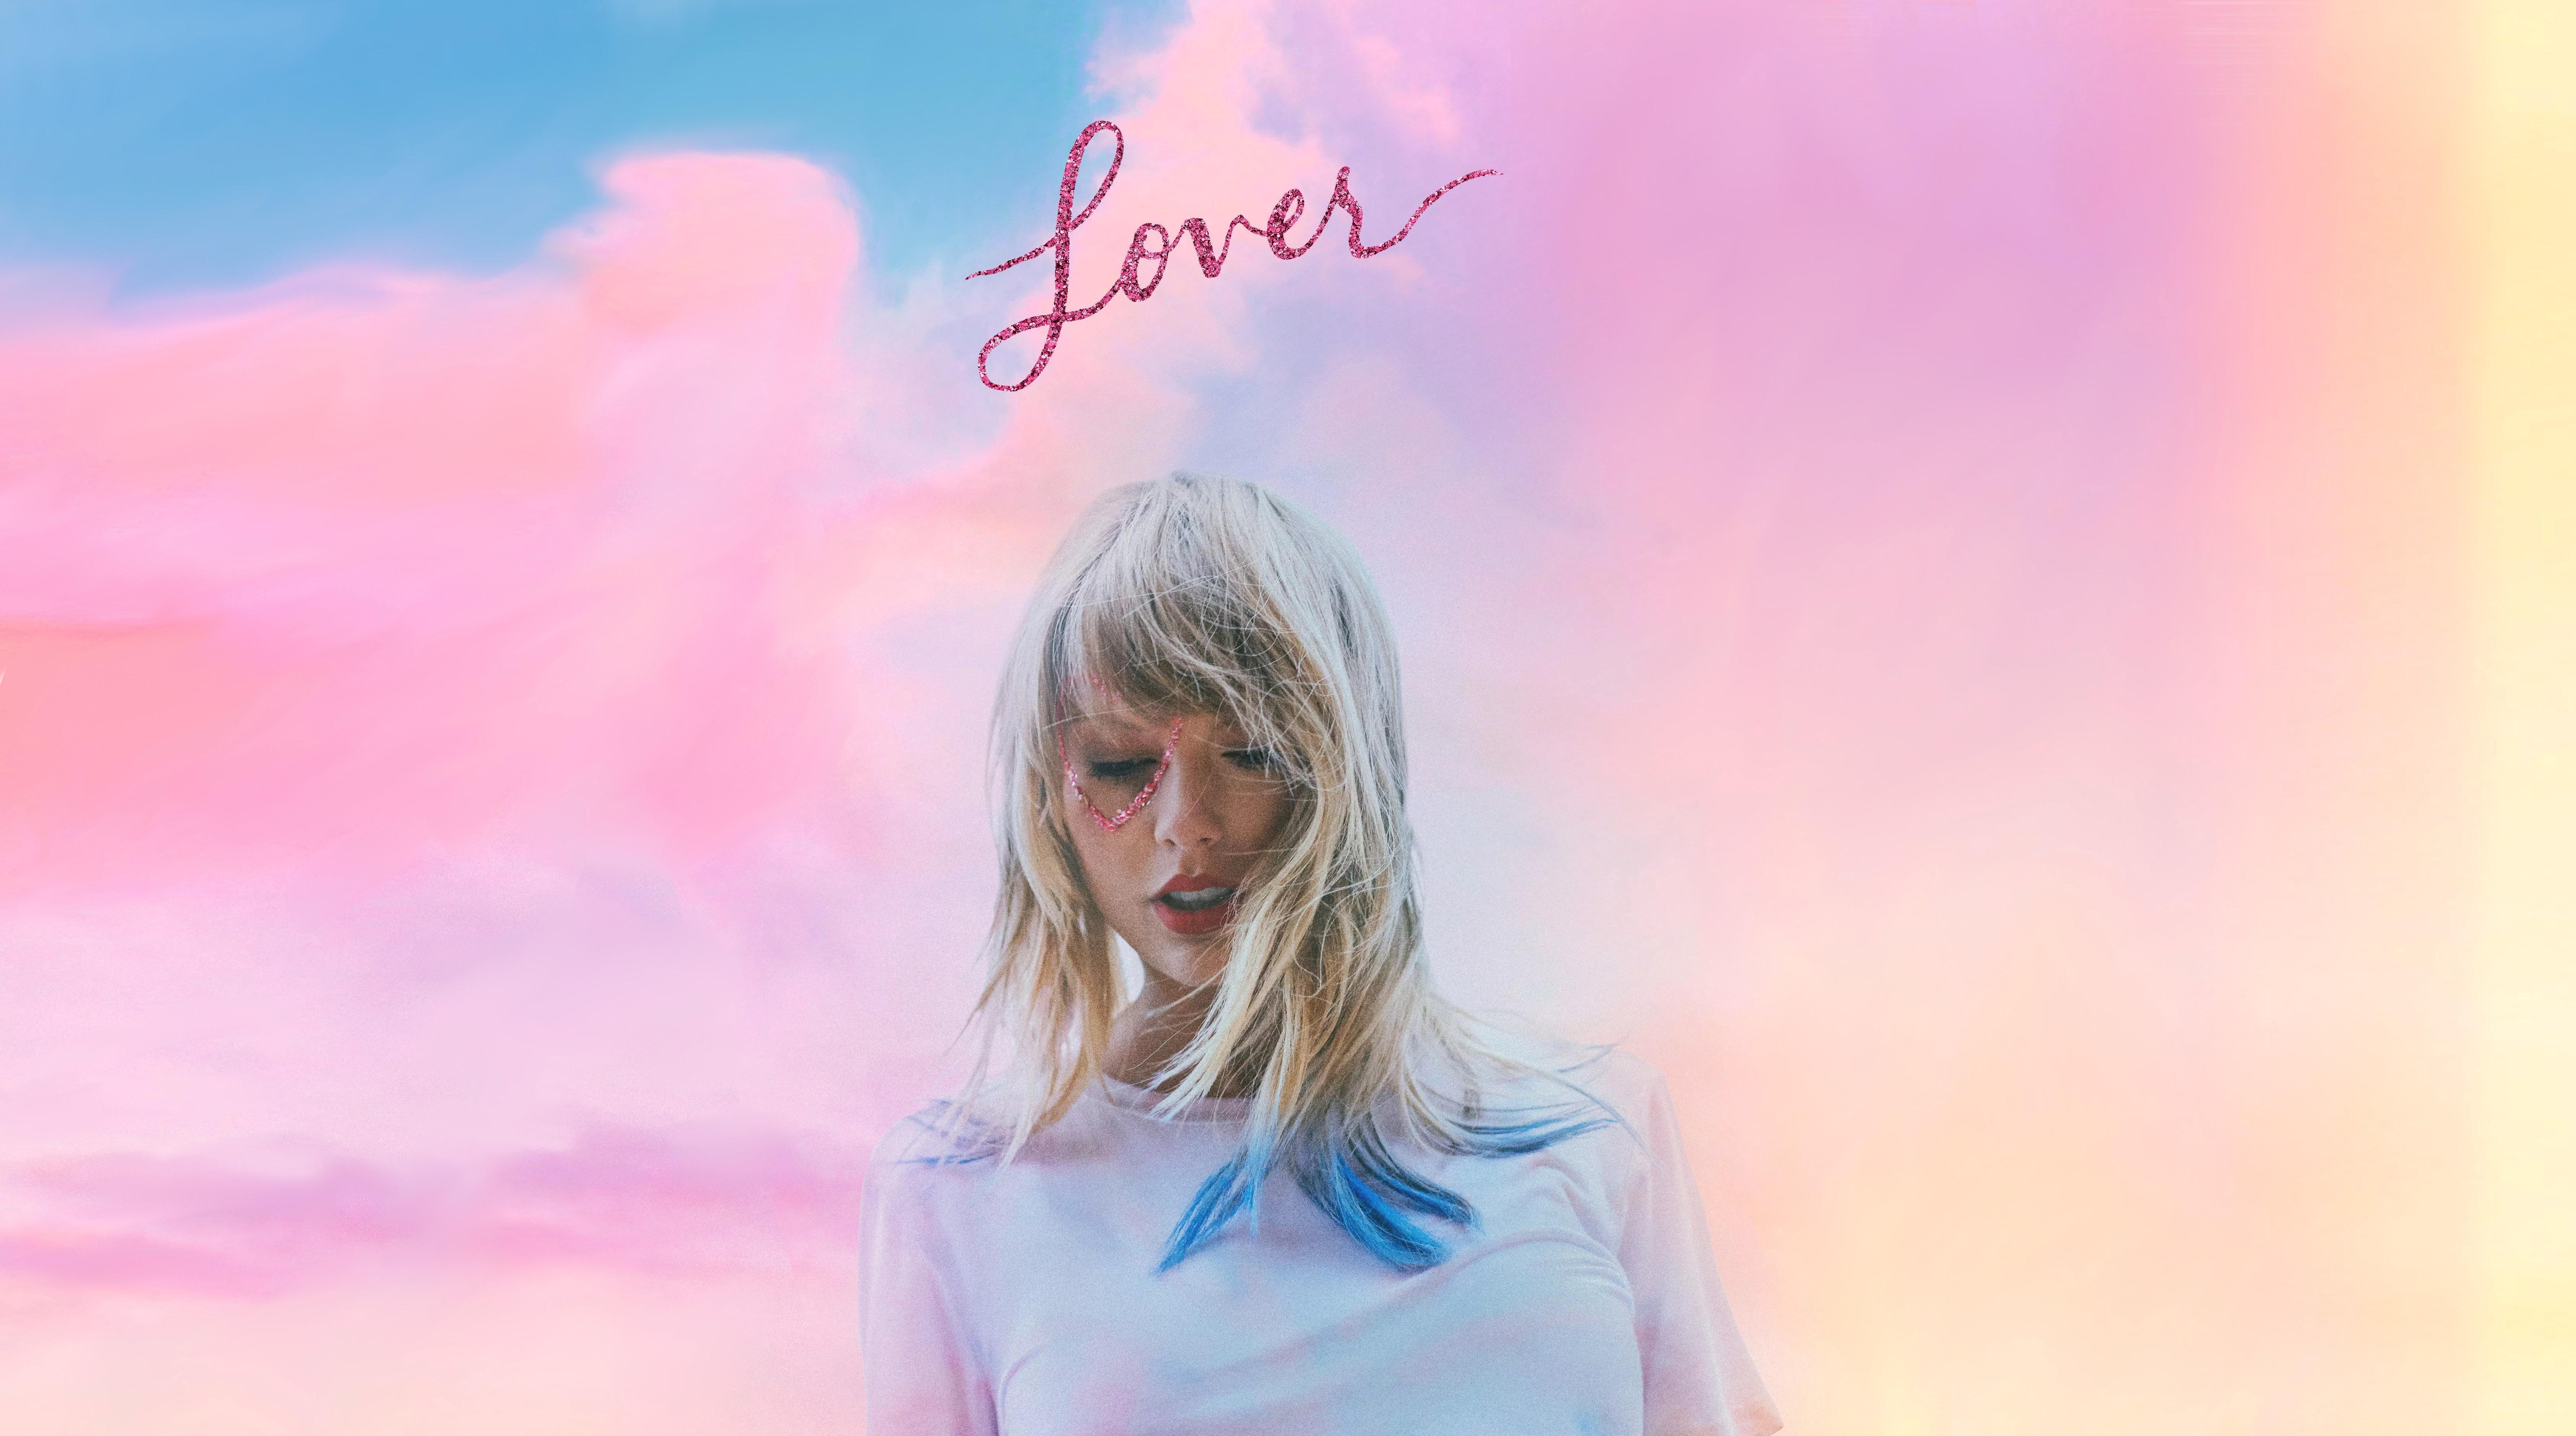 I Ve Created A High Resolution Desktop Wallpaper Of The Lover